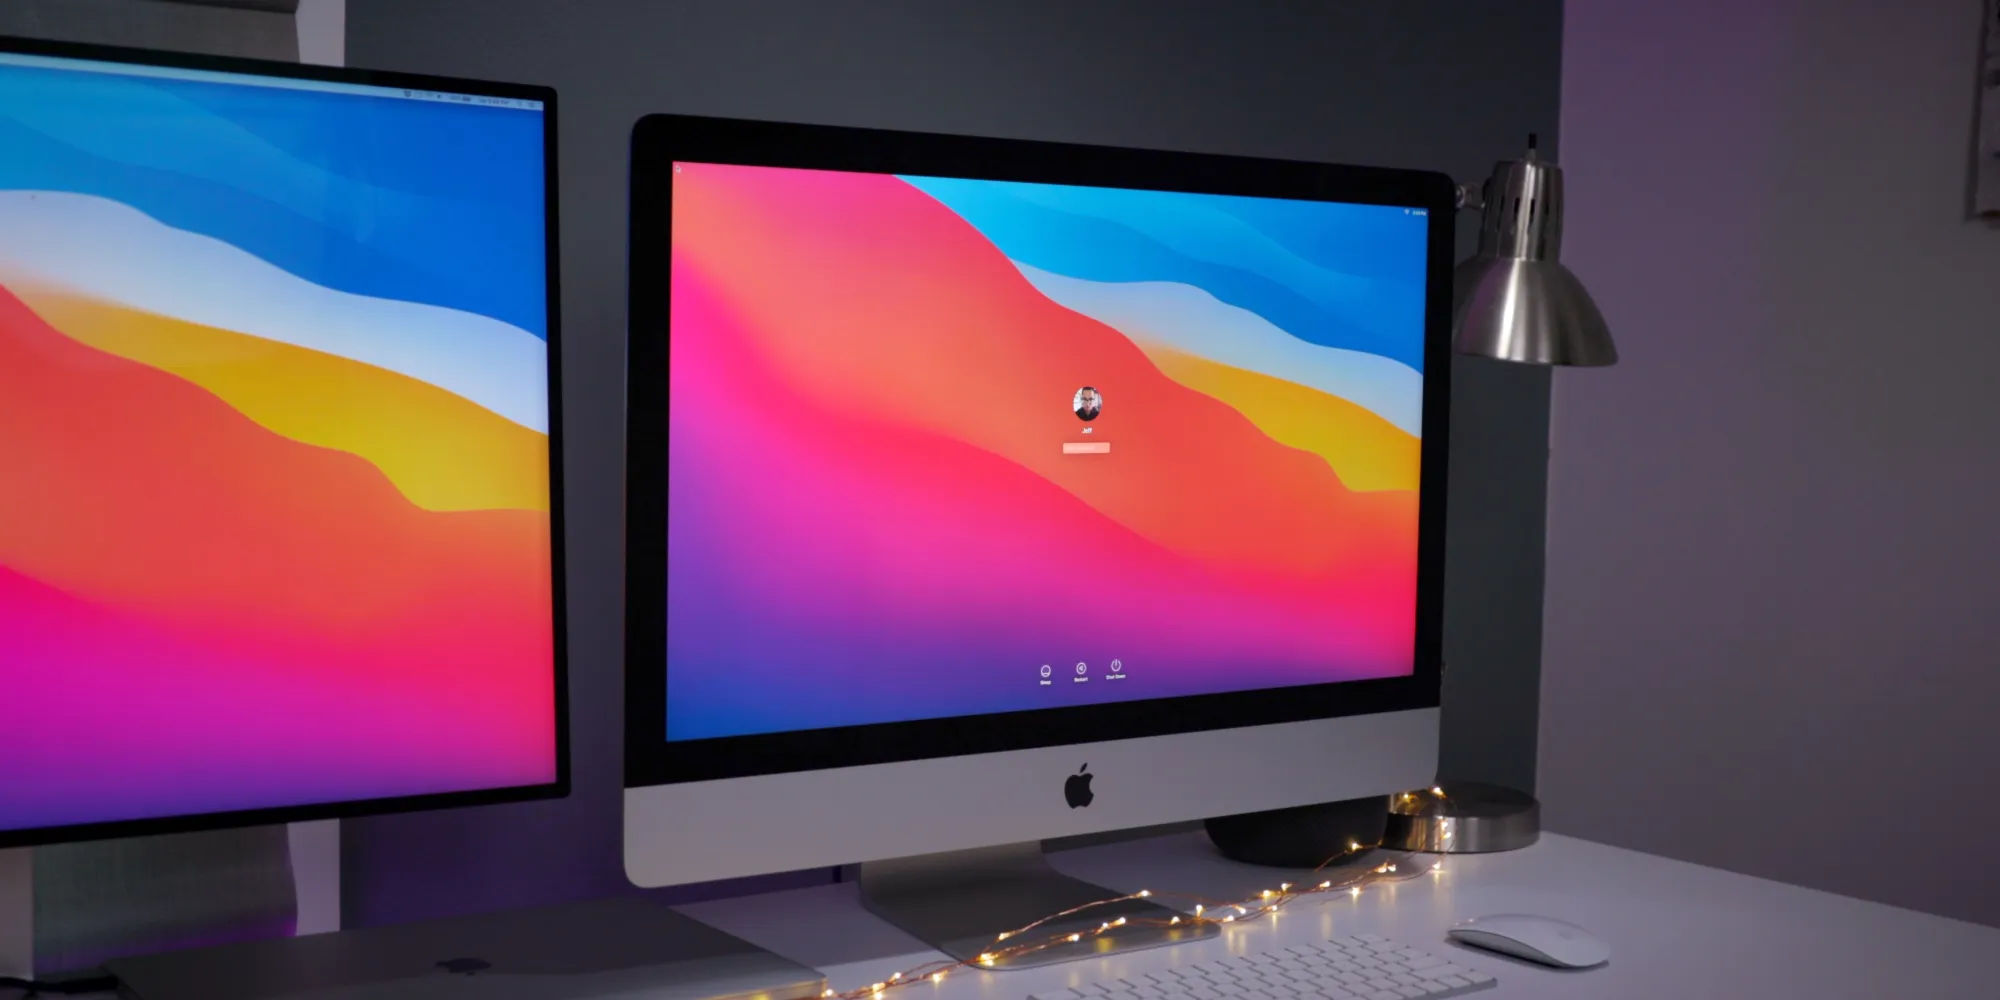 Exclusive: Apple currently has no plans to release a new, larger-screen iMac